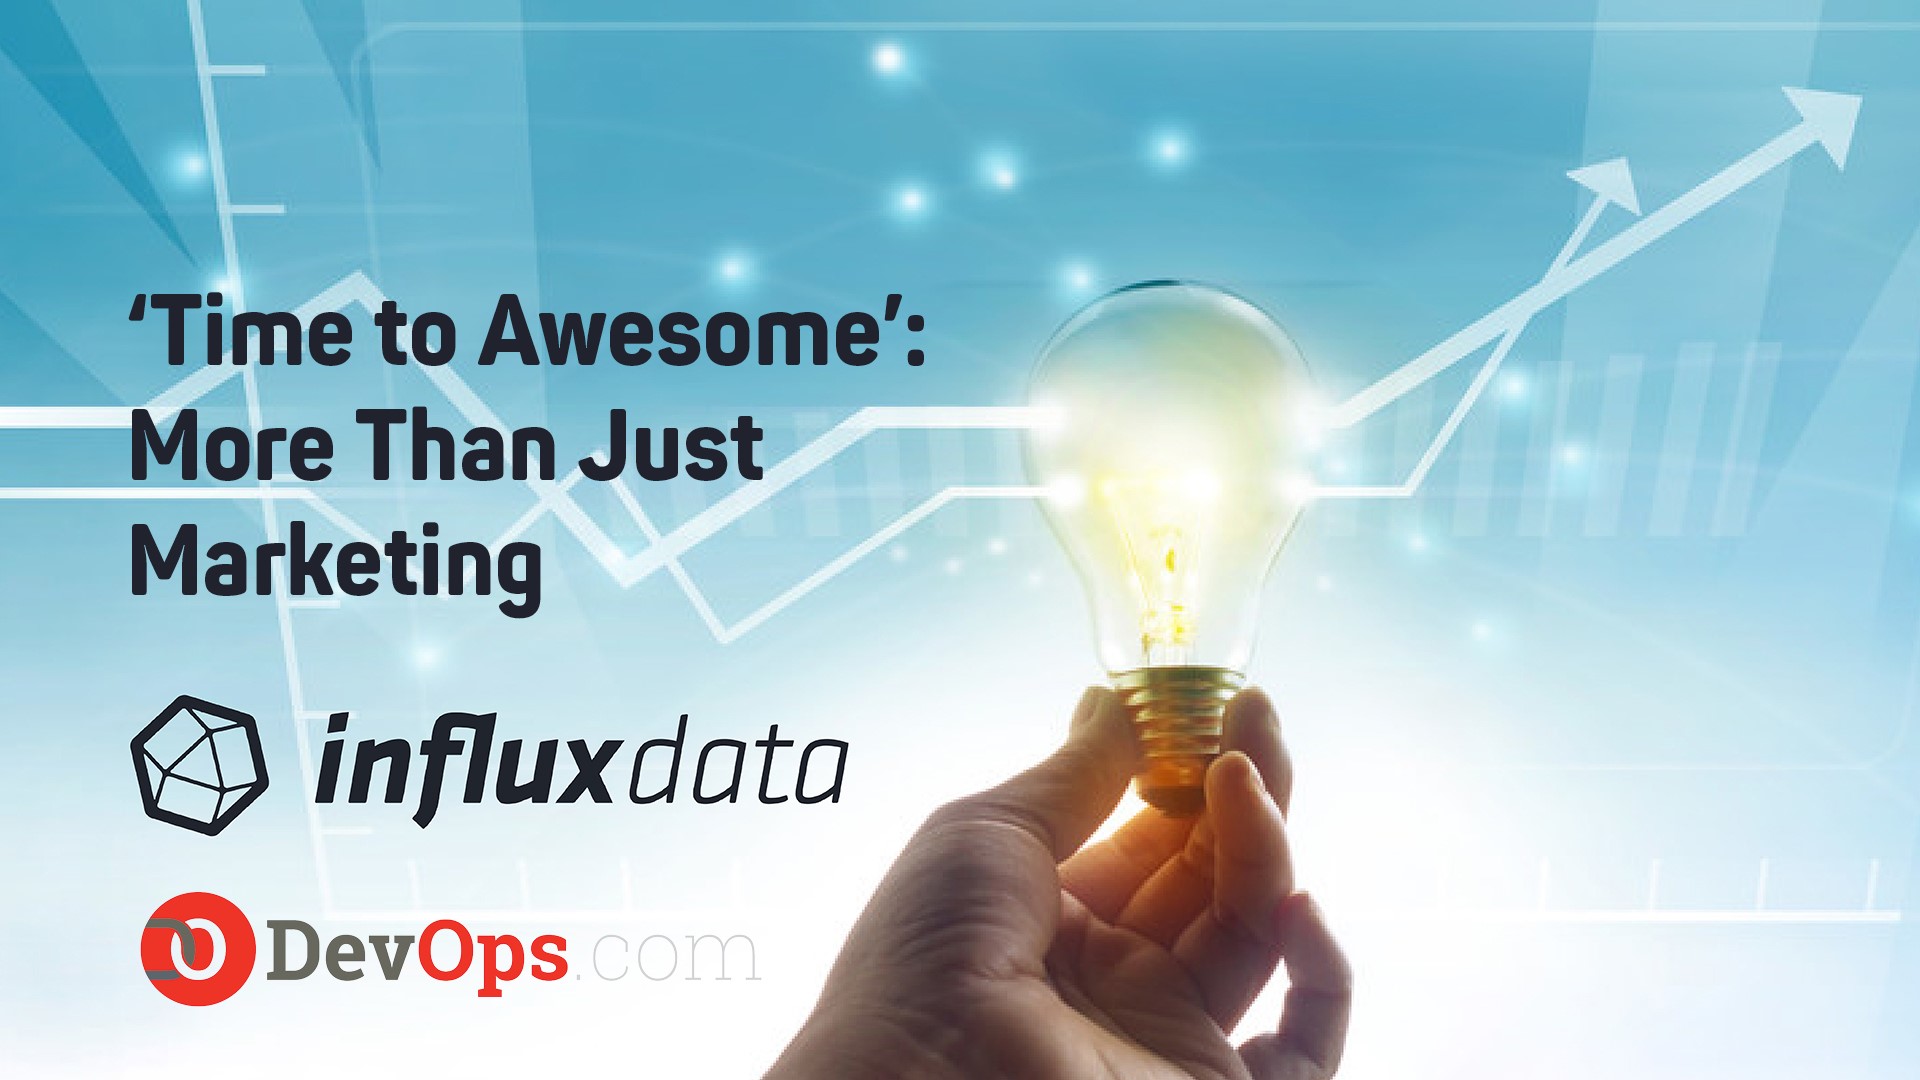 InfluxData Video Series: ‘Time to Awesome’ with Mark Herring